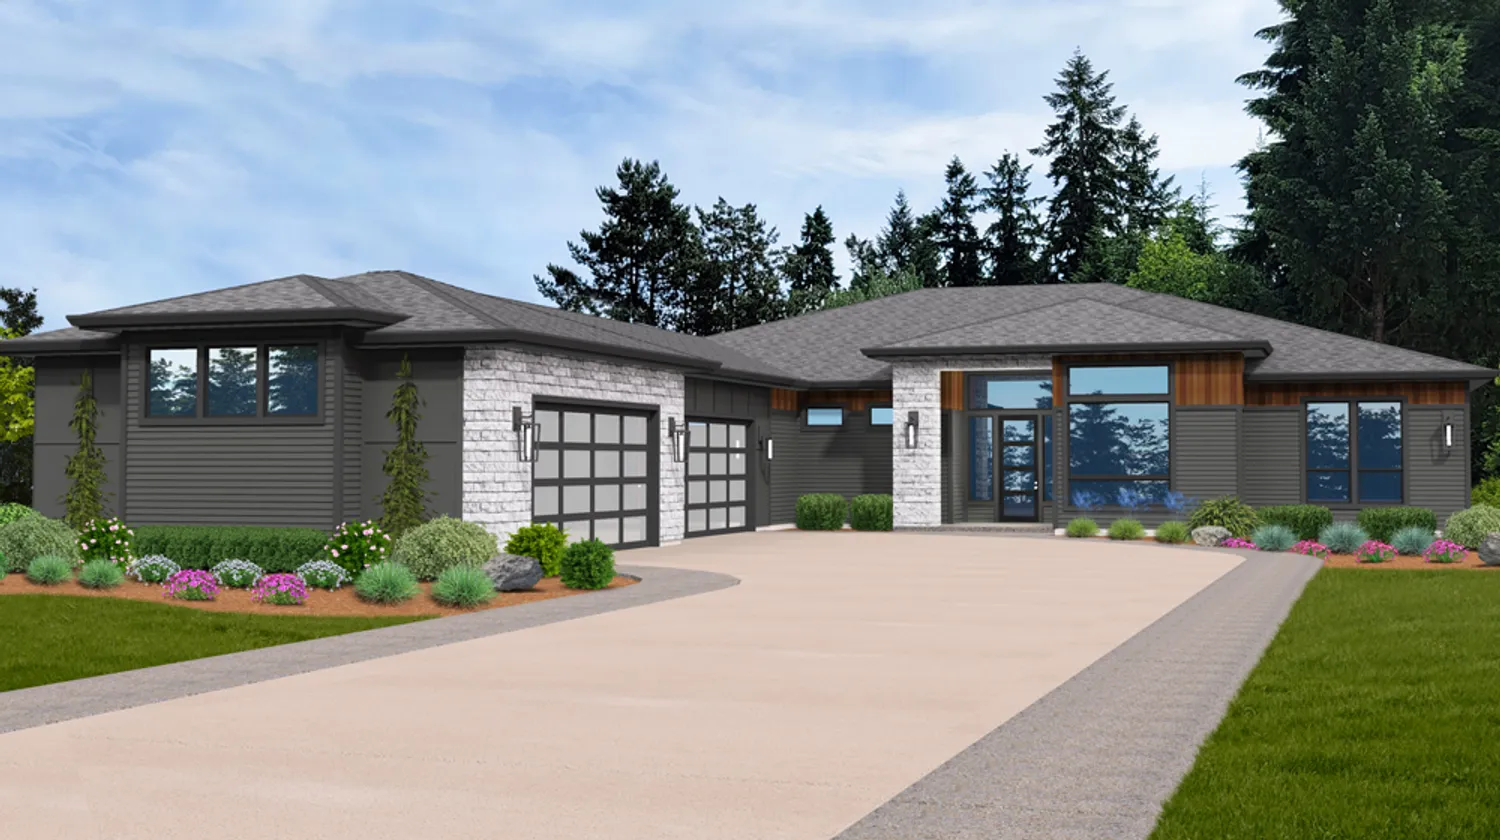 2021 Parade of Homes - The Solace House 7